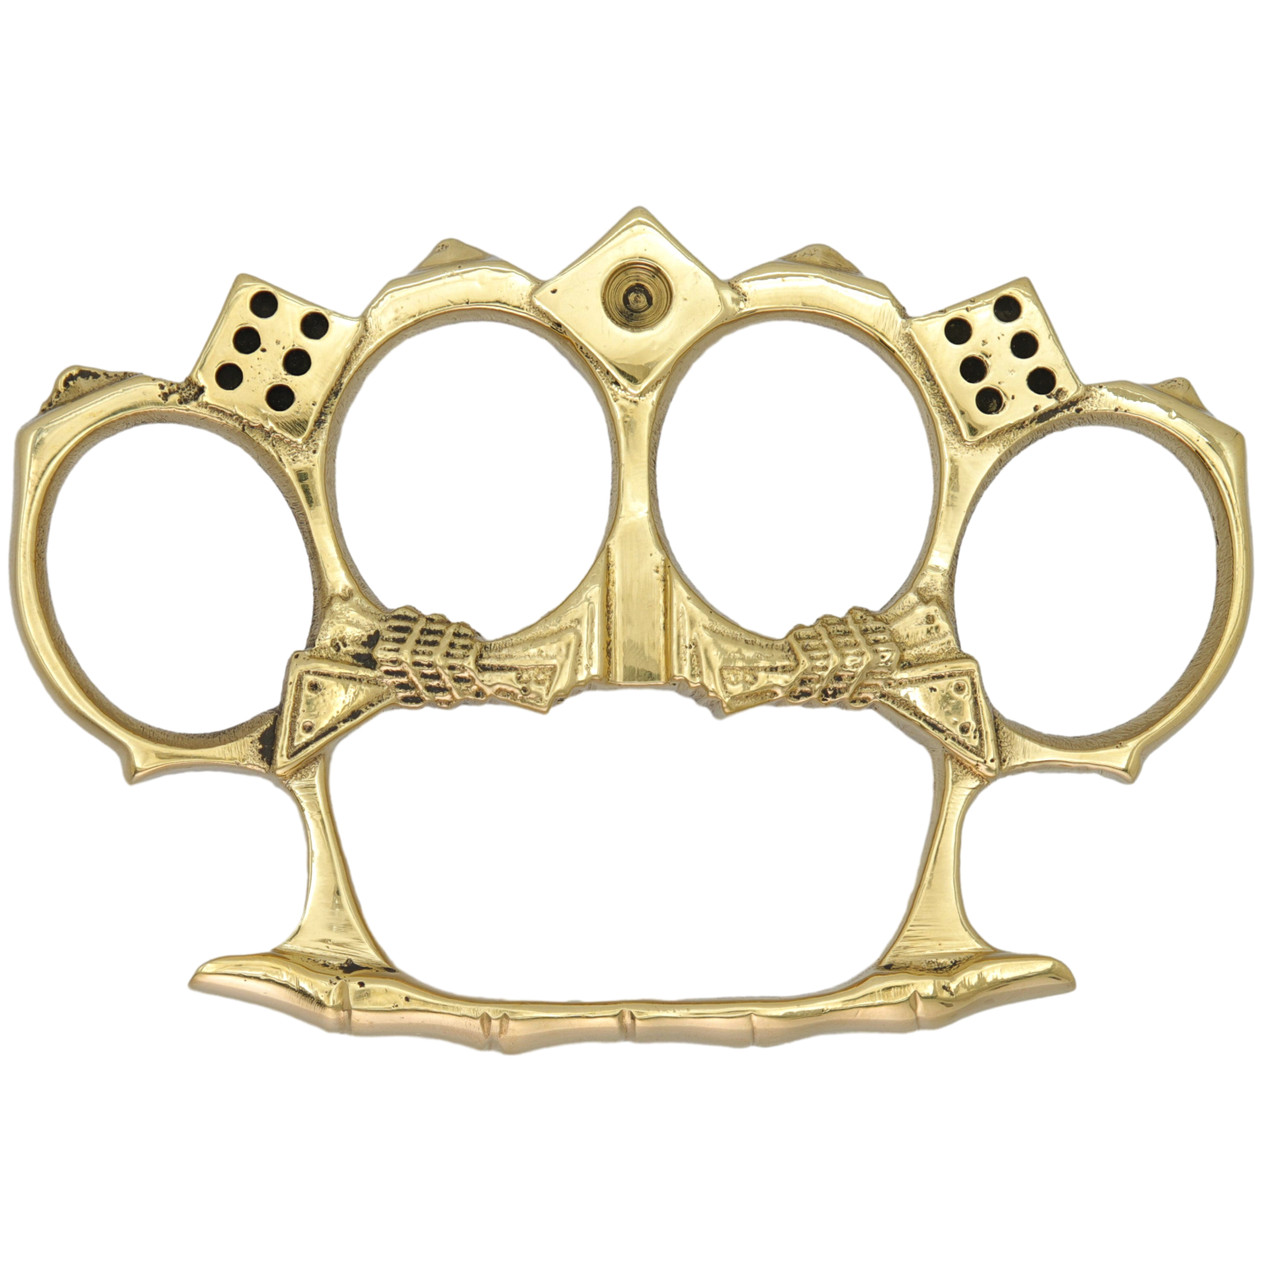 How much would brass knuckles really help in a fight? : r